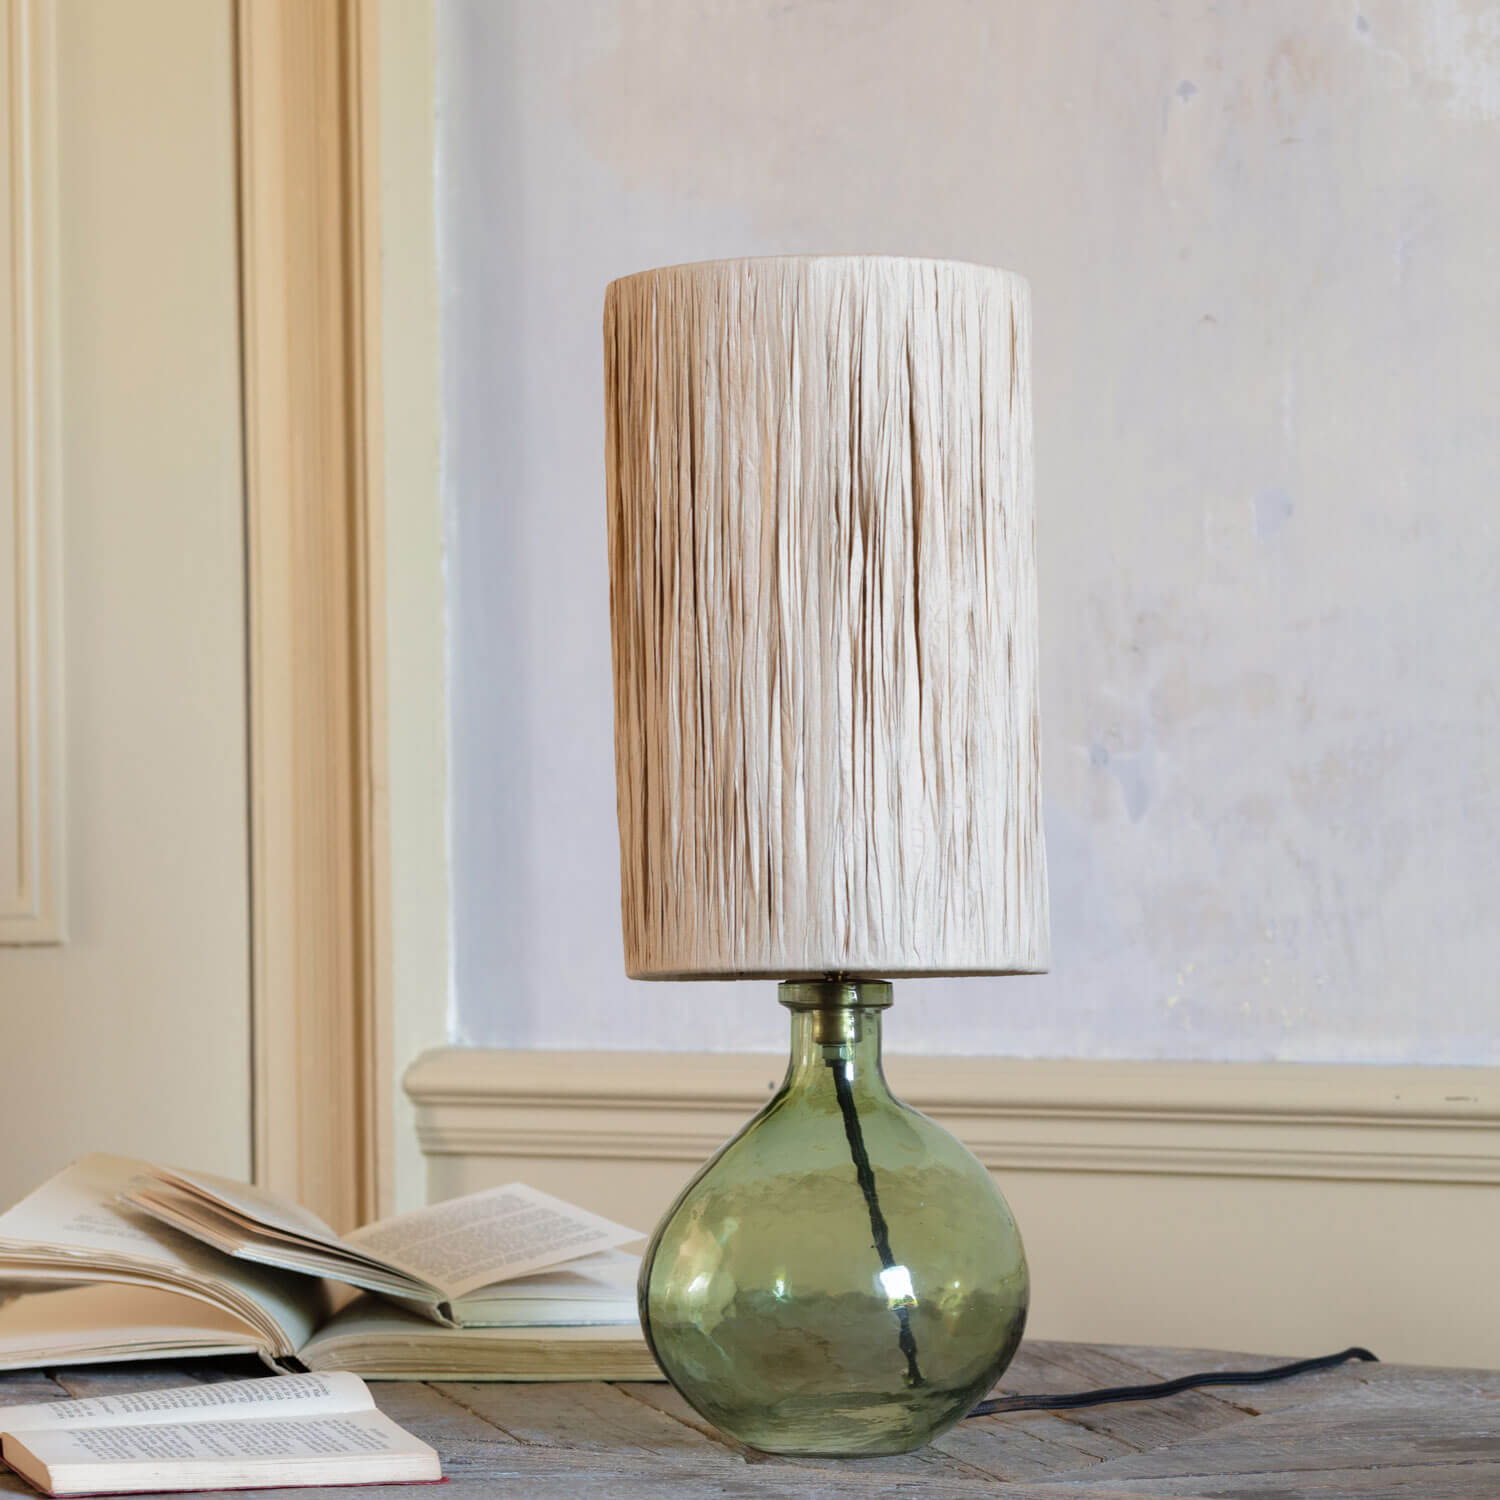 Read more about Graham and green lennox light green table lamp with shade